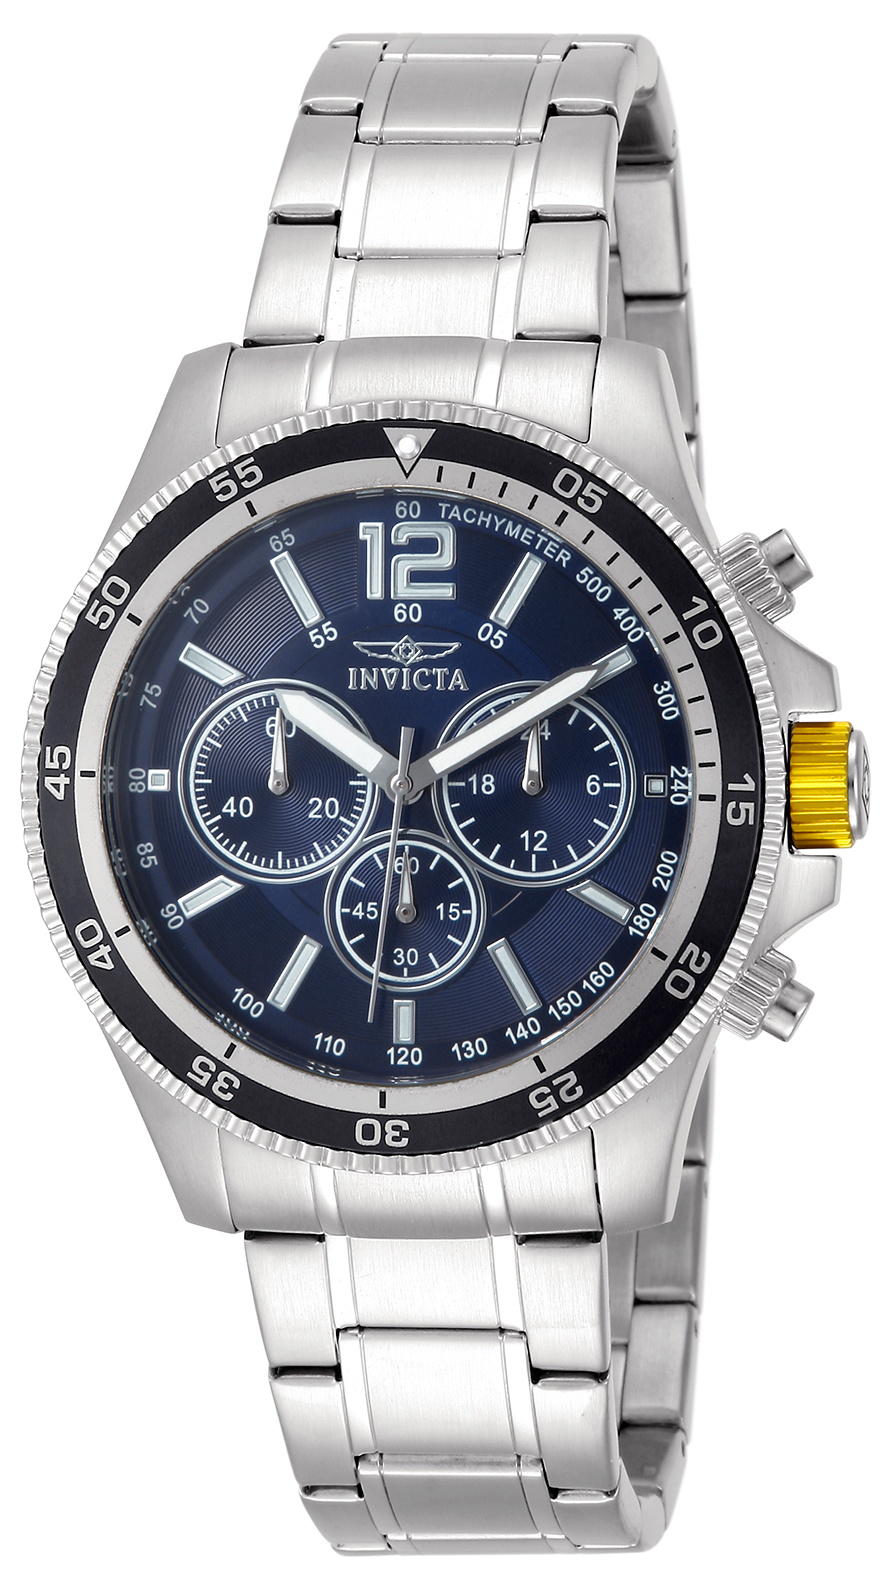 Pre-Owned Invicta Specialty Quartz Men's Watch - 45mm Stainless Steel Case, Stainless Steel Band, Steel (AIC-13974)